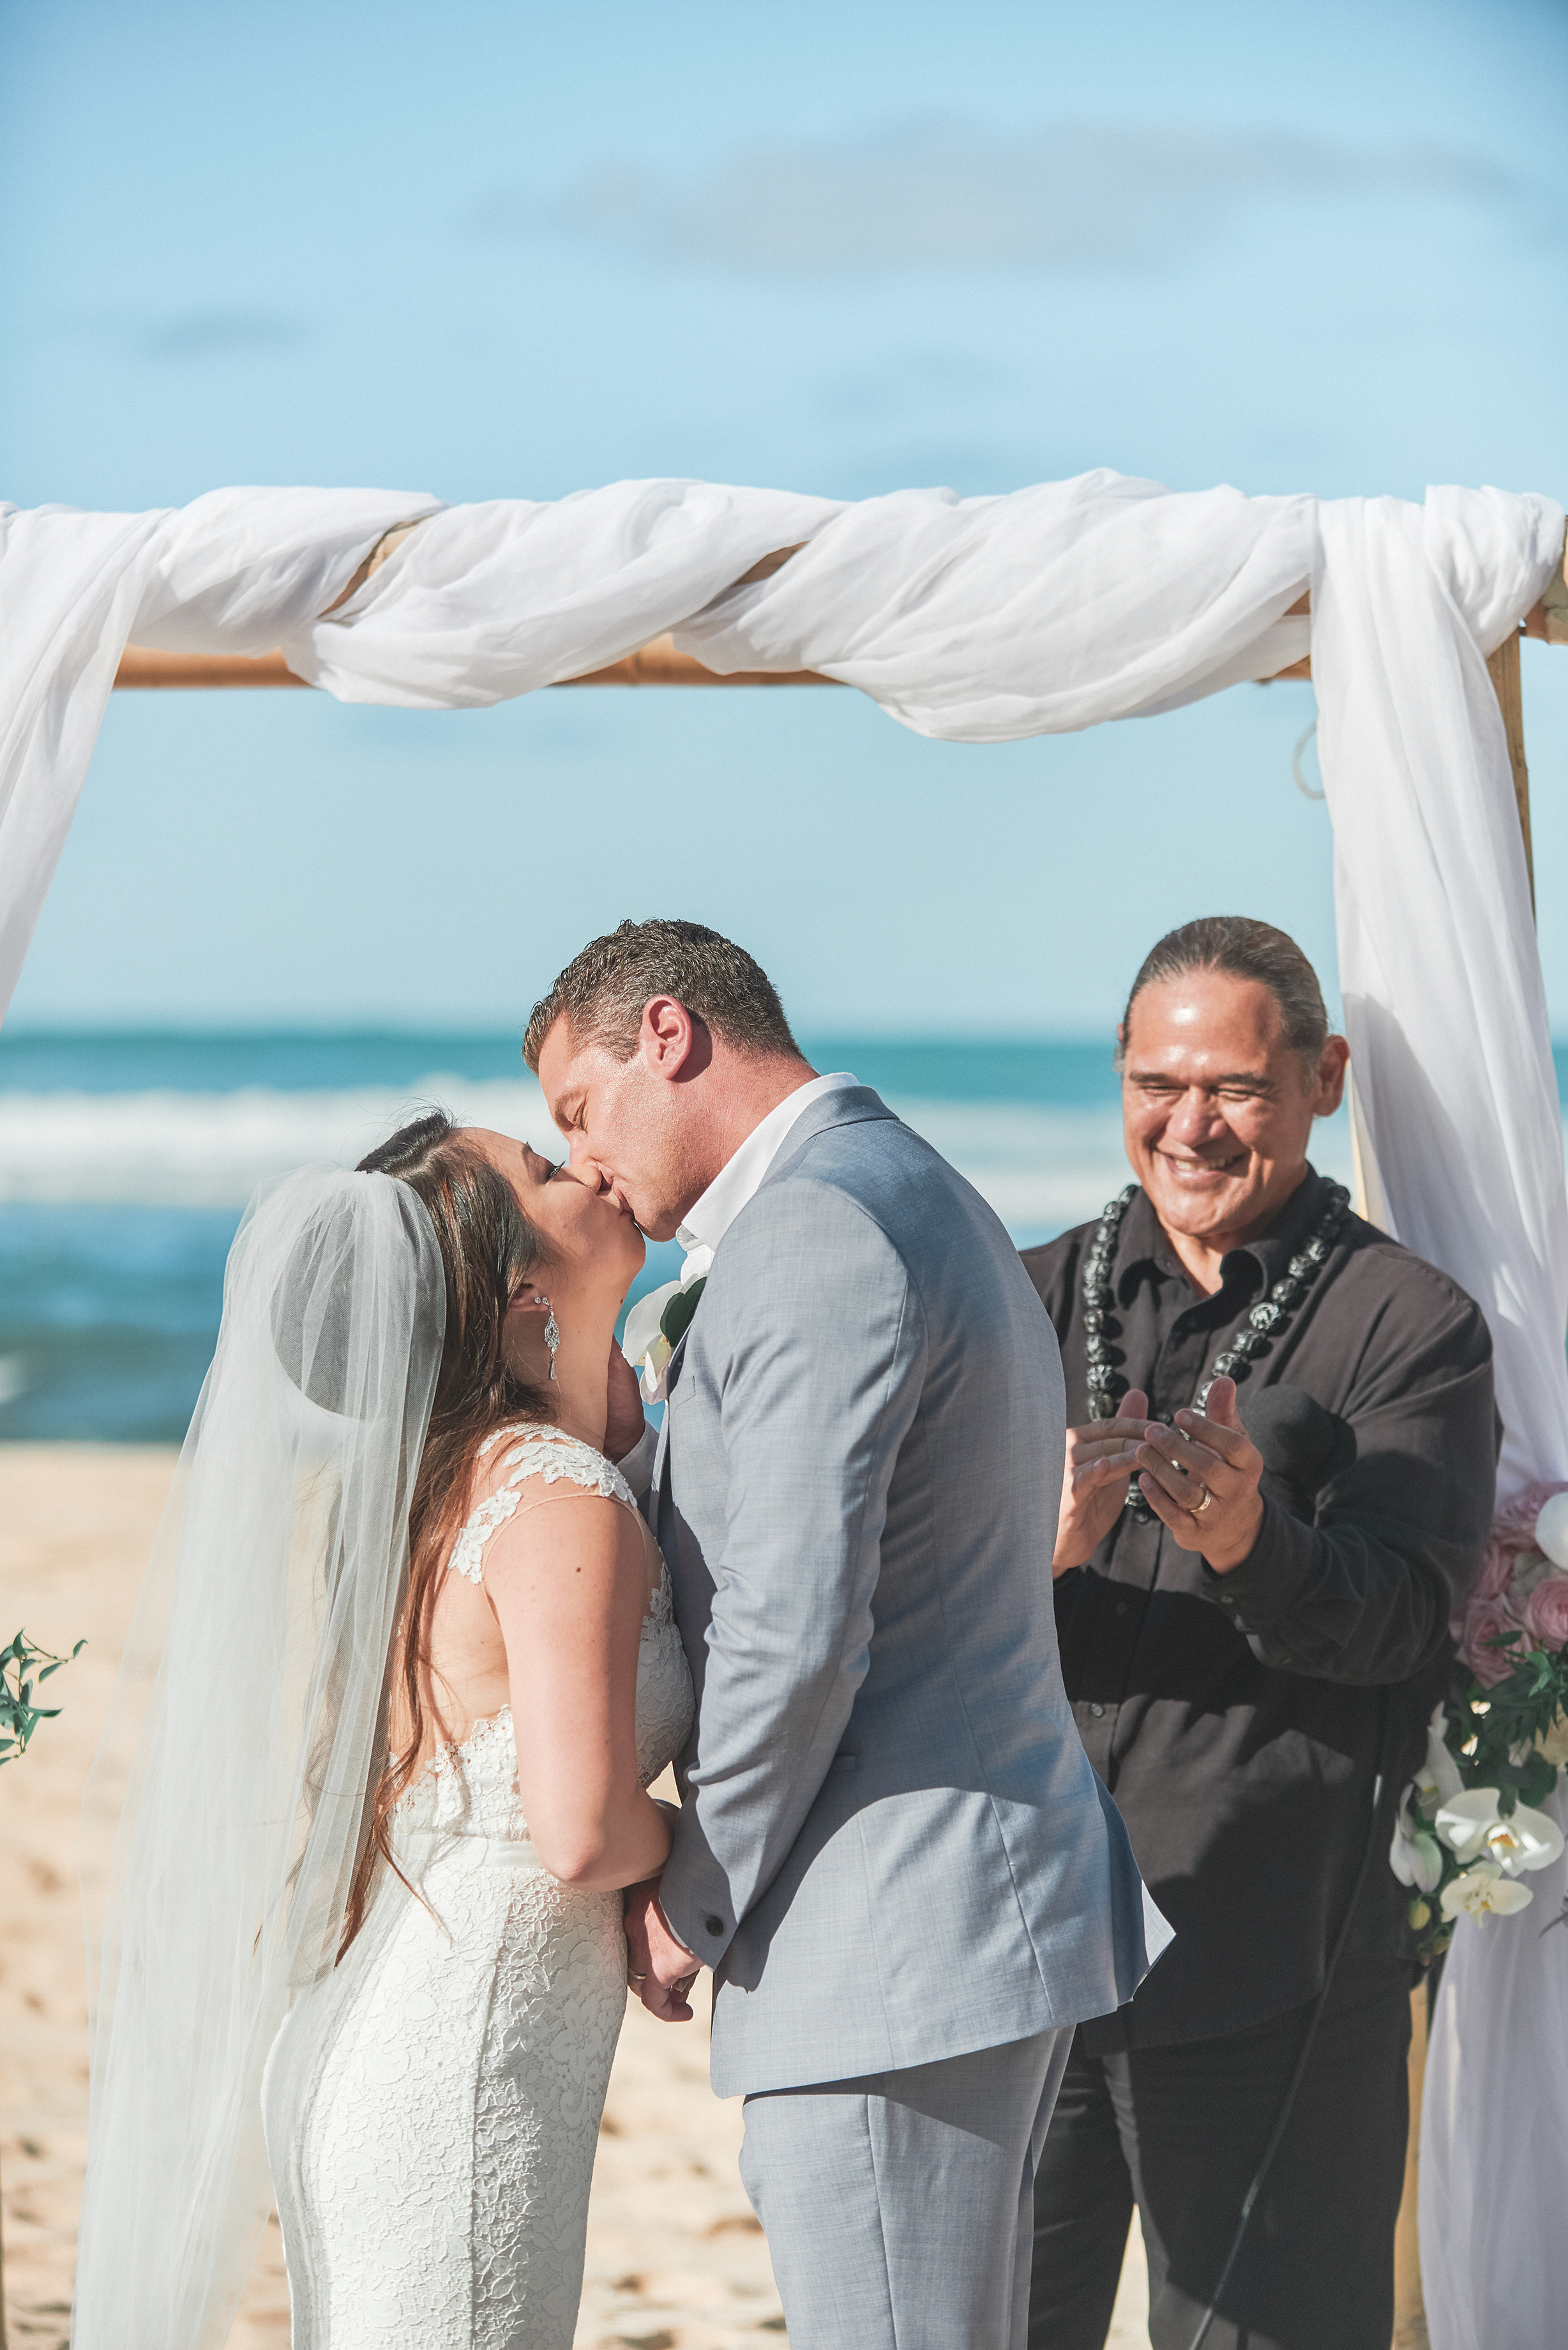 turtle bay resort wedding north shore oahu stephen ludwig photography- terry and isabel (32).jpg